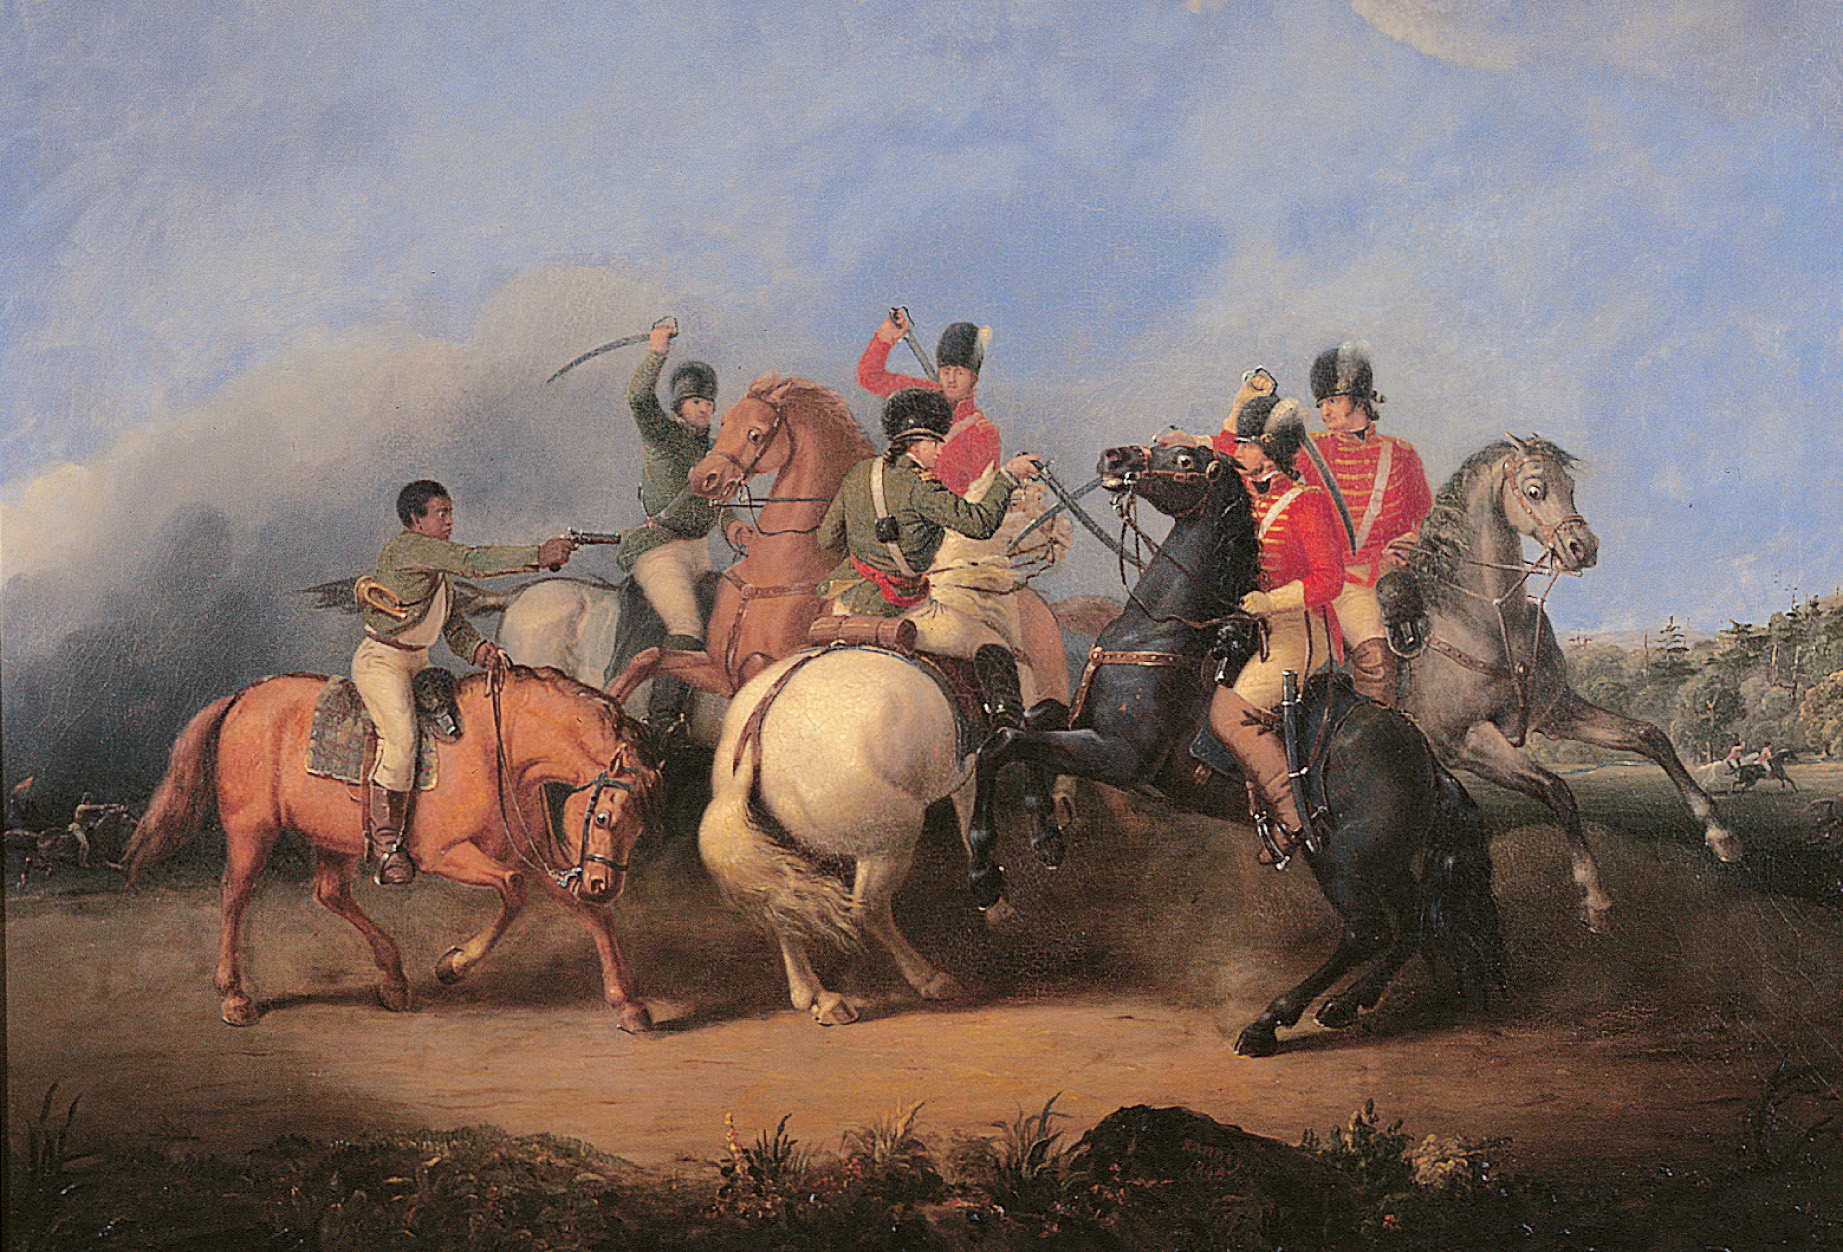 Painting: American and British soldiers fight on horseback with swords. An African-American soldier aims a pistol at a British foe.